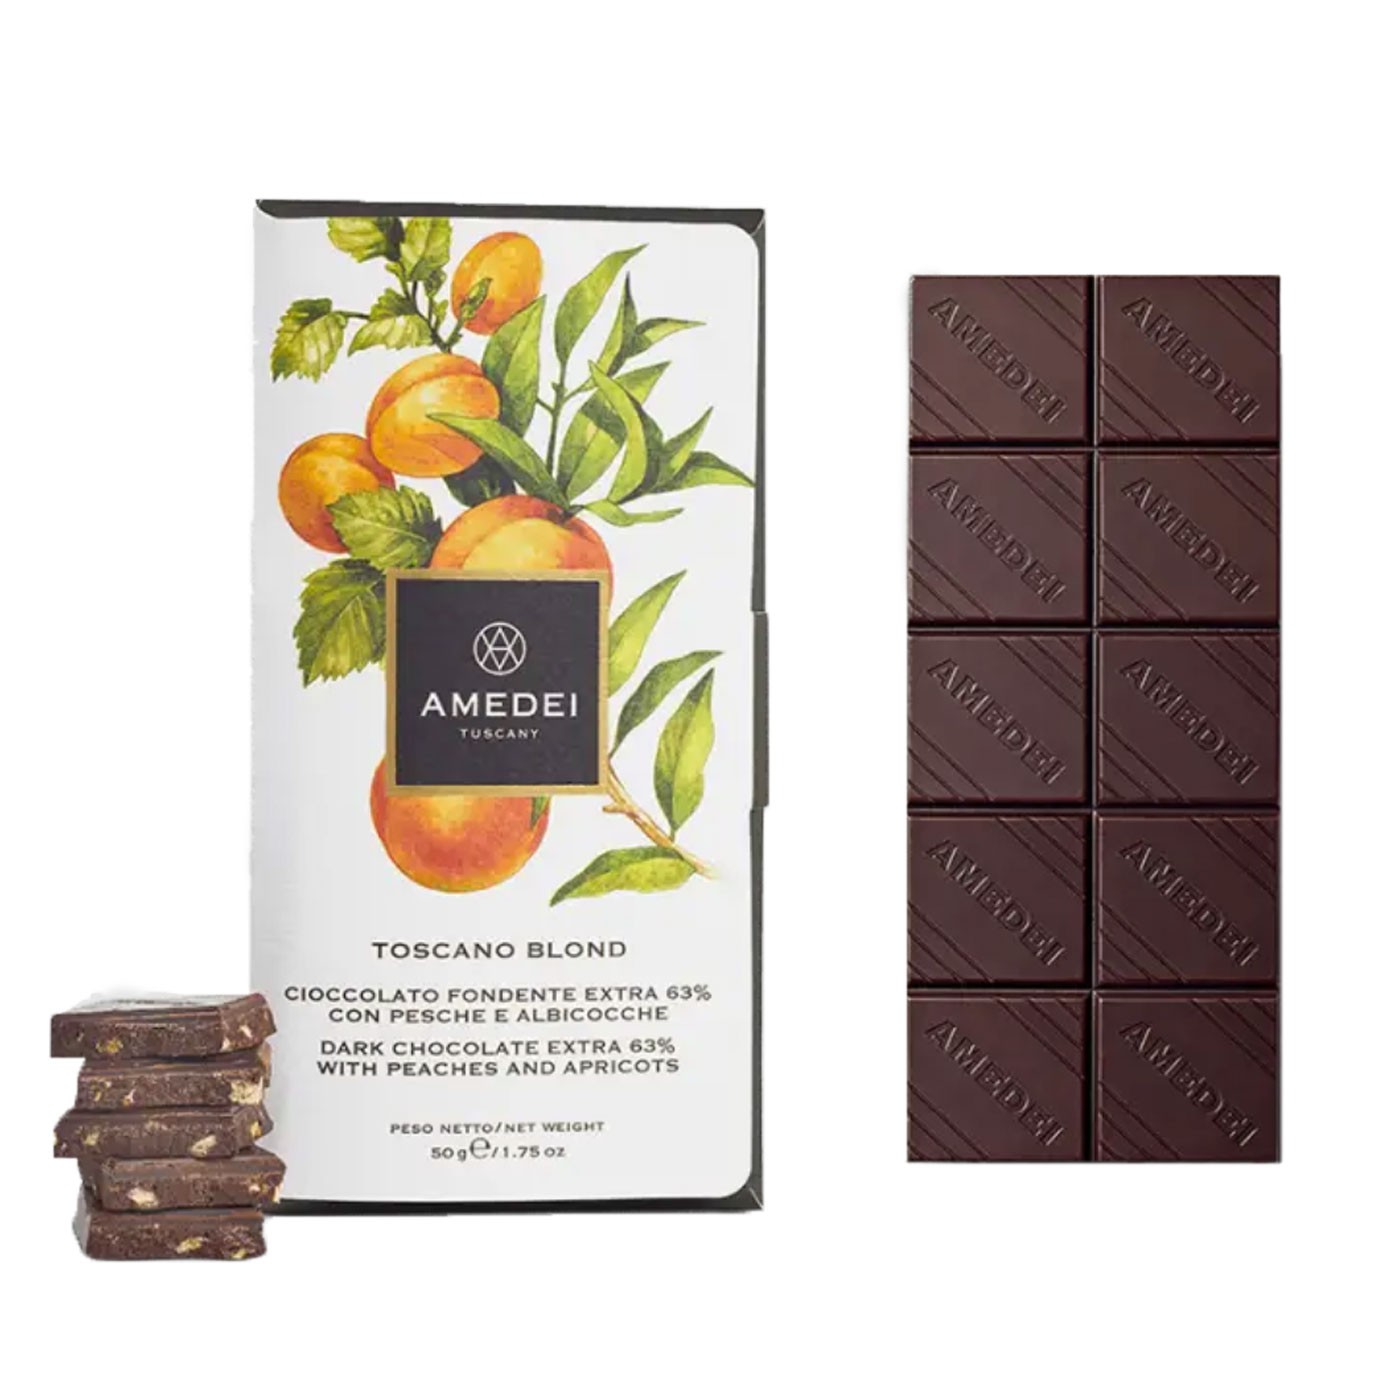 Toscano Blond - 70% Dark Chocolate Bar with Apricots and Peaches 1.7 oz